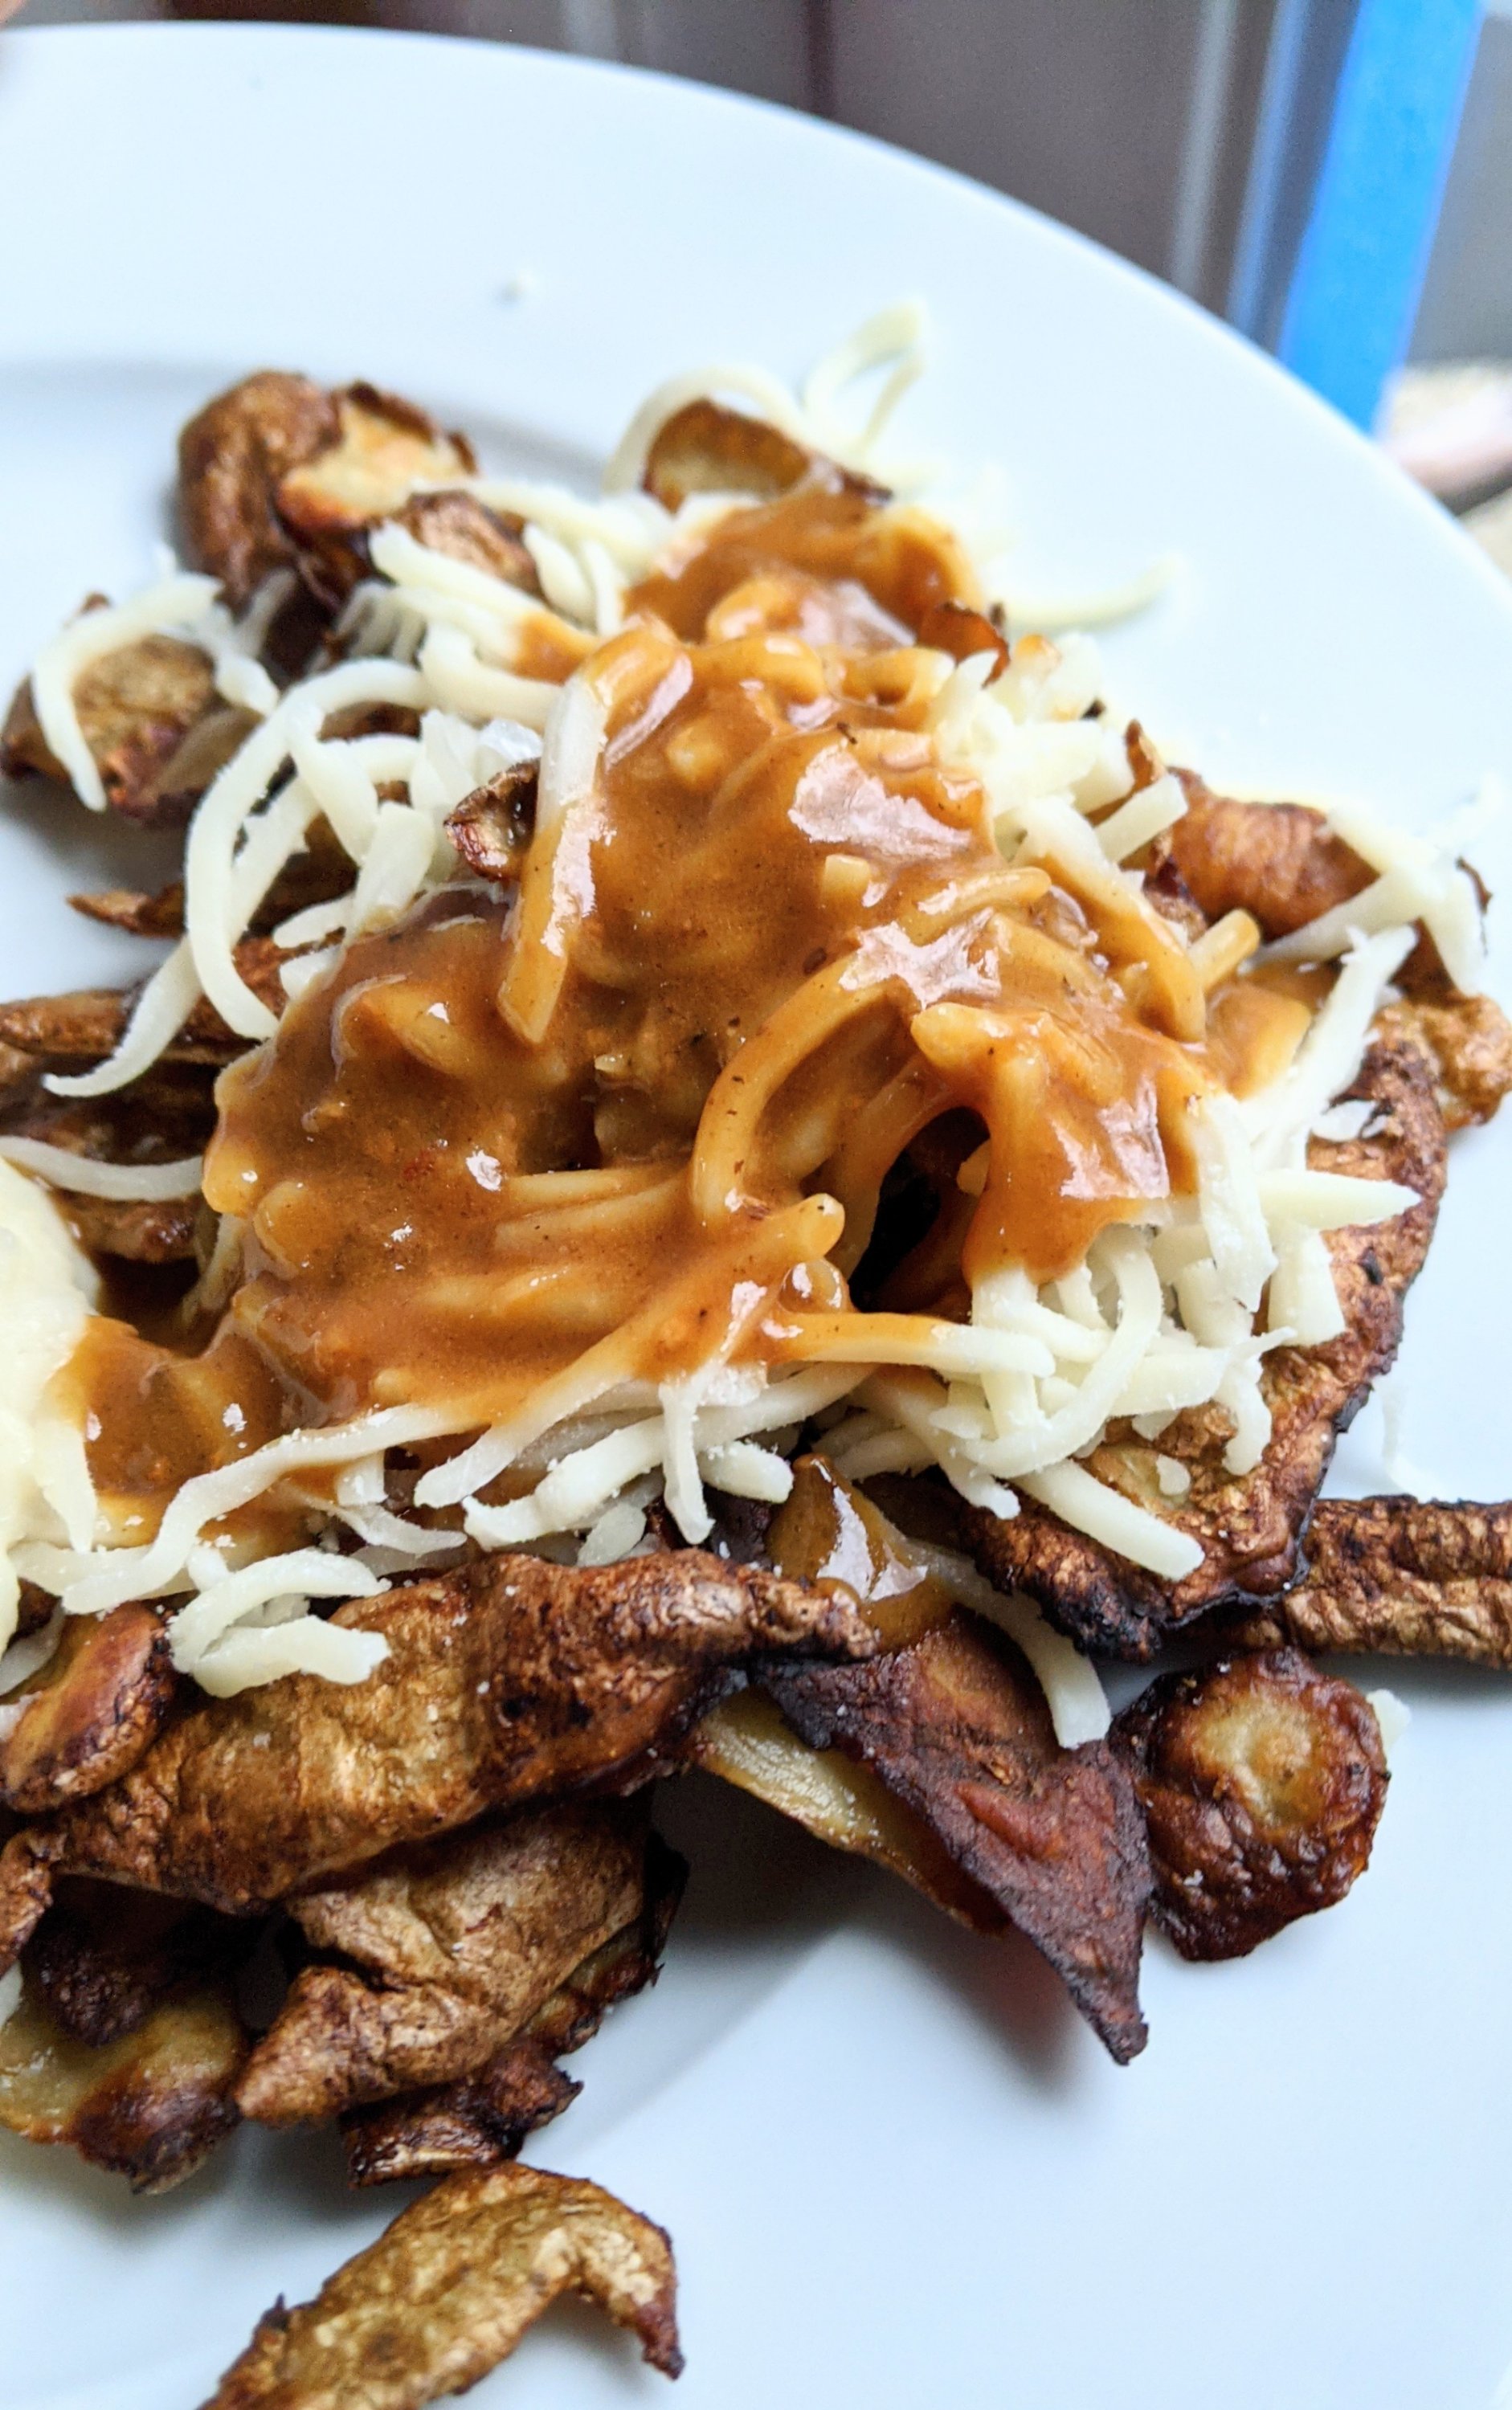 cheater poutine with potato peels in recipes can i save potato peels to eat healthy ways to eat peels from potatoes and turn them into poutine with st. hubert gravy and mozzarella